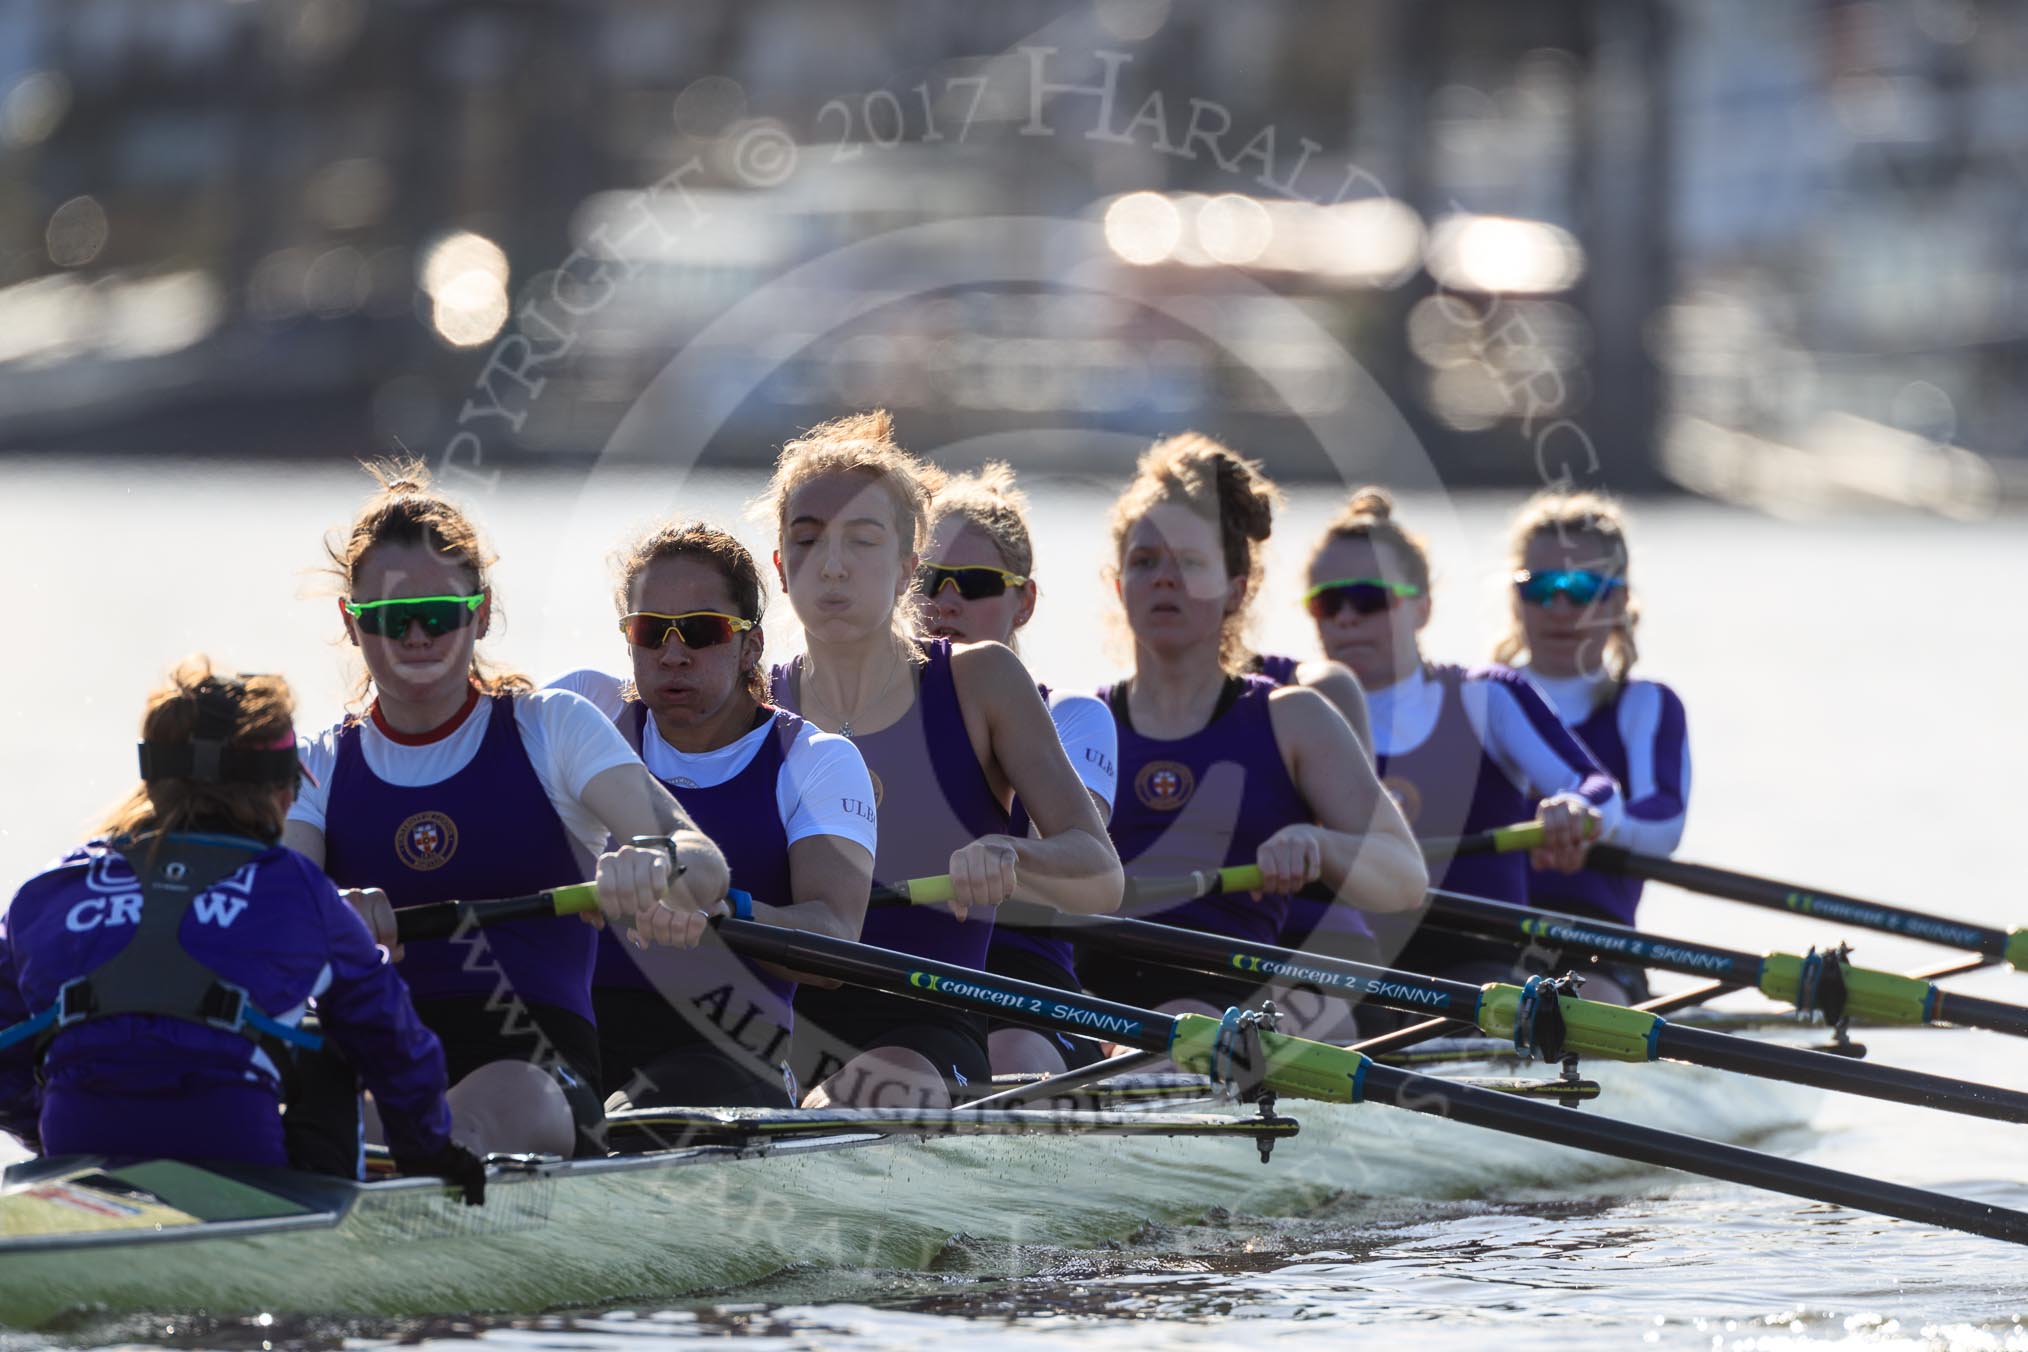 The Women's Boat Race season 2018 - fixture CUWBC vs. ULBC: The start to the second part of the race, here the ULBC Eight with cox Lauren Holland, stroke Issy Powel, 7 Jordan Cole-Huissan, 6 Oonagh Cousins, 5 Hannah Roberts, 4 Katherine Barnhill, 3 Fionnuala Gannon, 2 Robyn Hart-Winks, bow Ally French.
River Thames between Putney Bridge and Mortlake,
London SW15,

United Kingdom,
on 17 February 2018 at 13:27, image #103